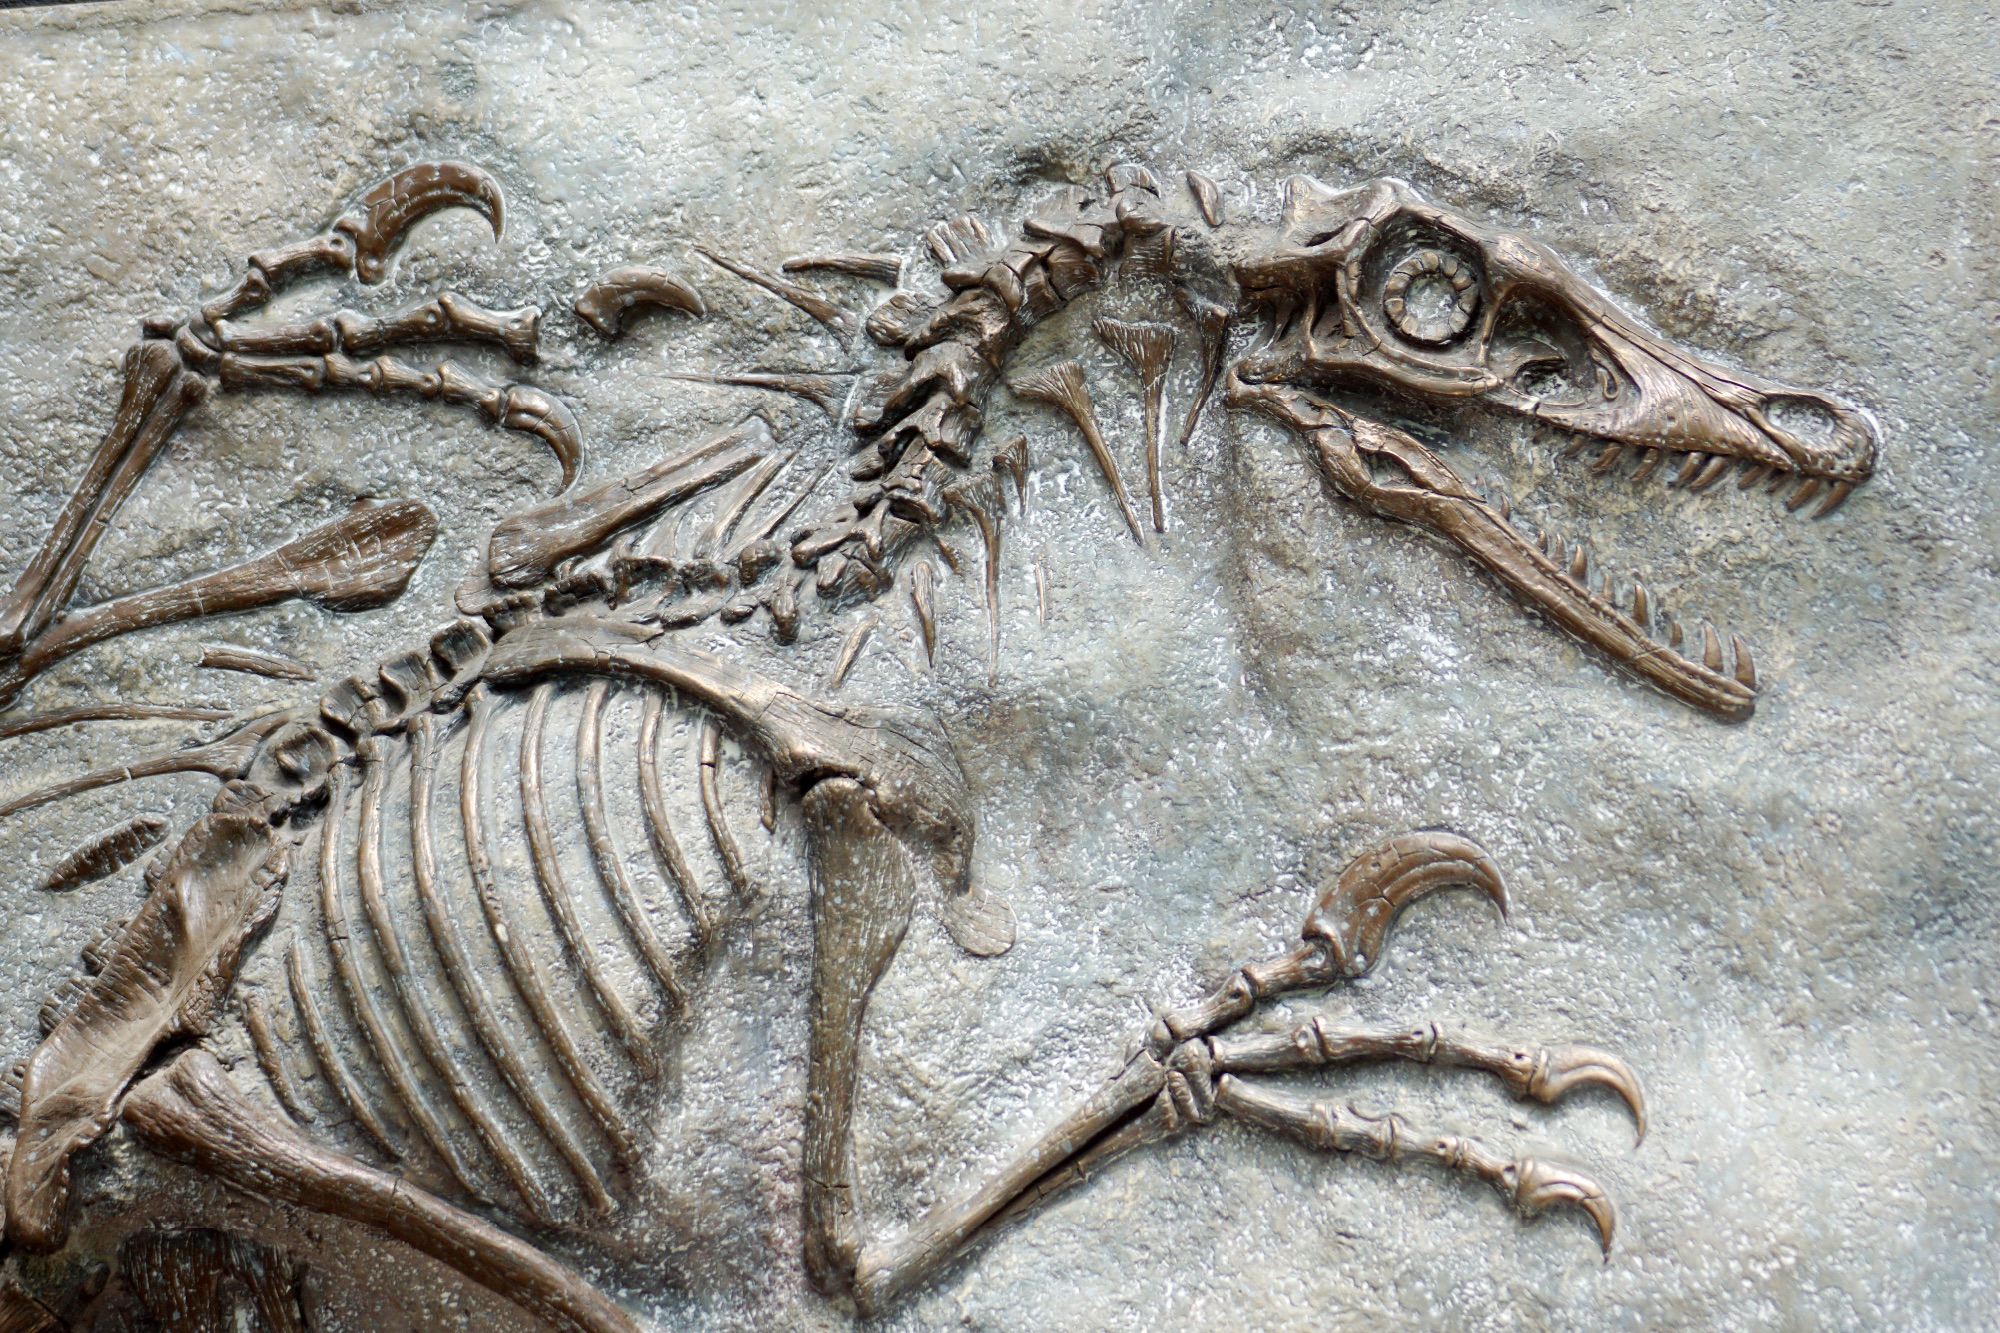 A Dinosaur fossil skeleton with firce large claws and with its mouth wide open to reveal many sharp teeth.